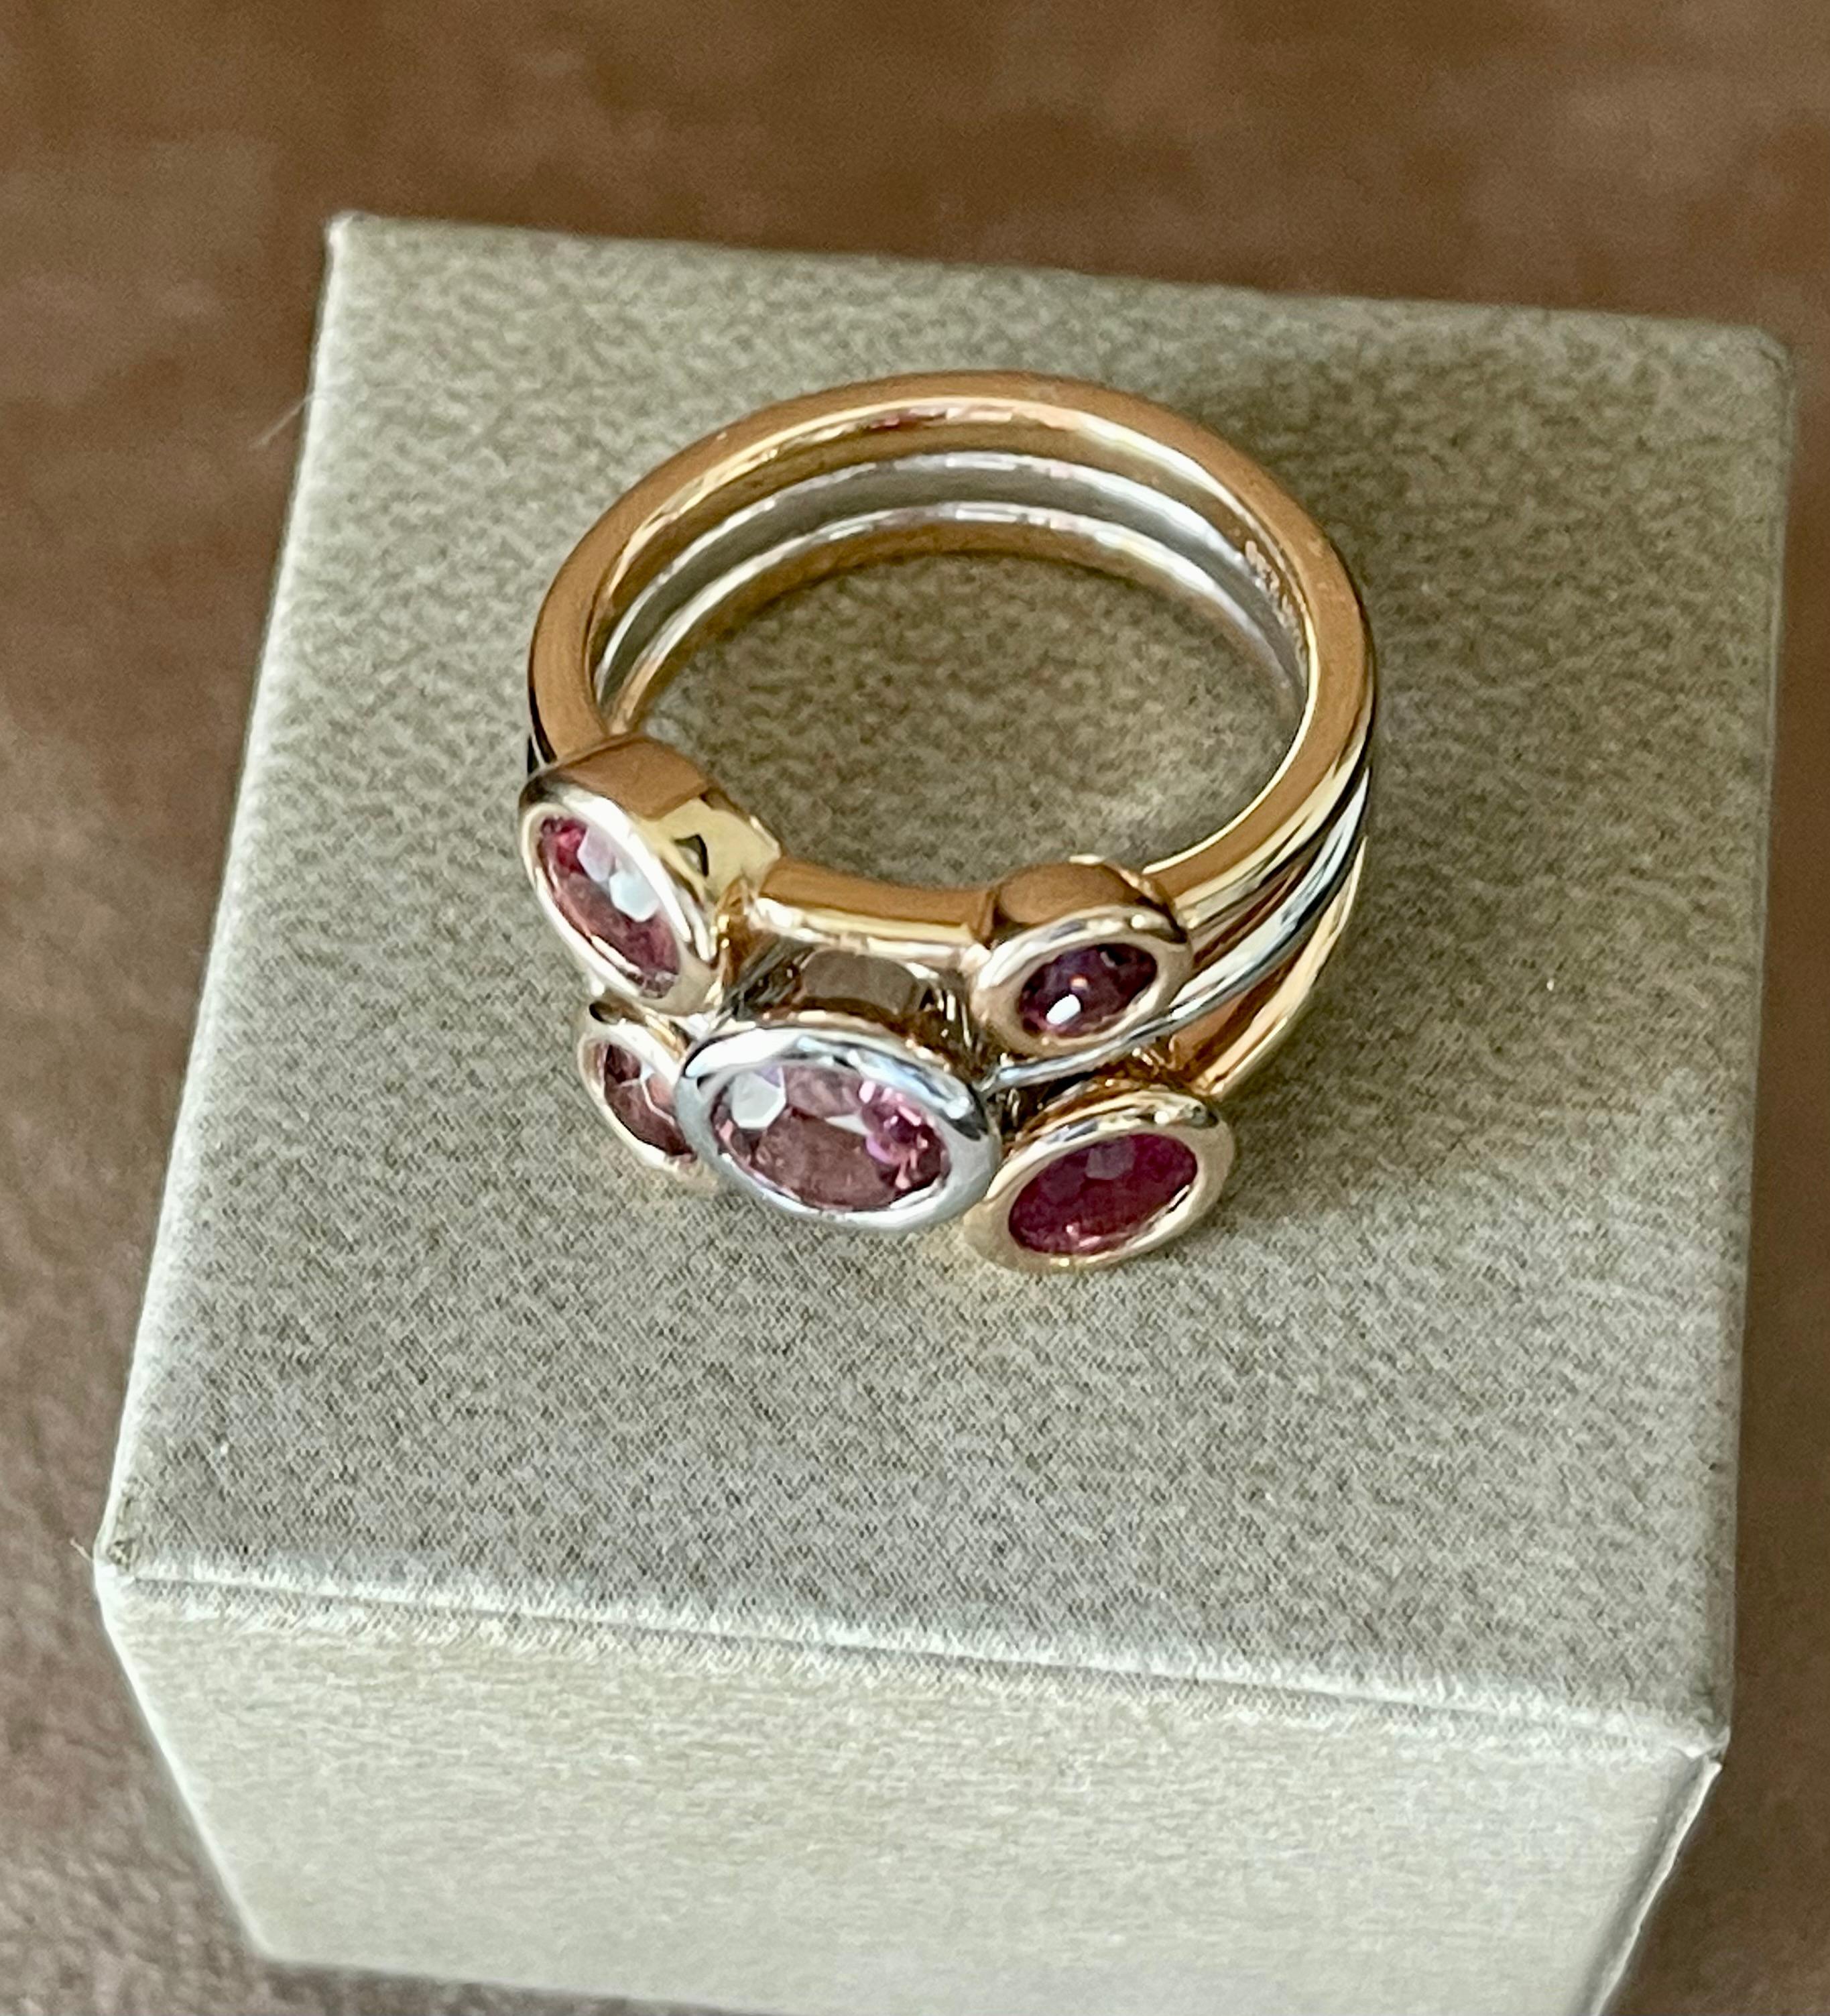 Brilliant Cut Modern White and Pink Gold Ring Pink Tourmaline